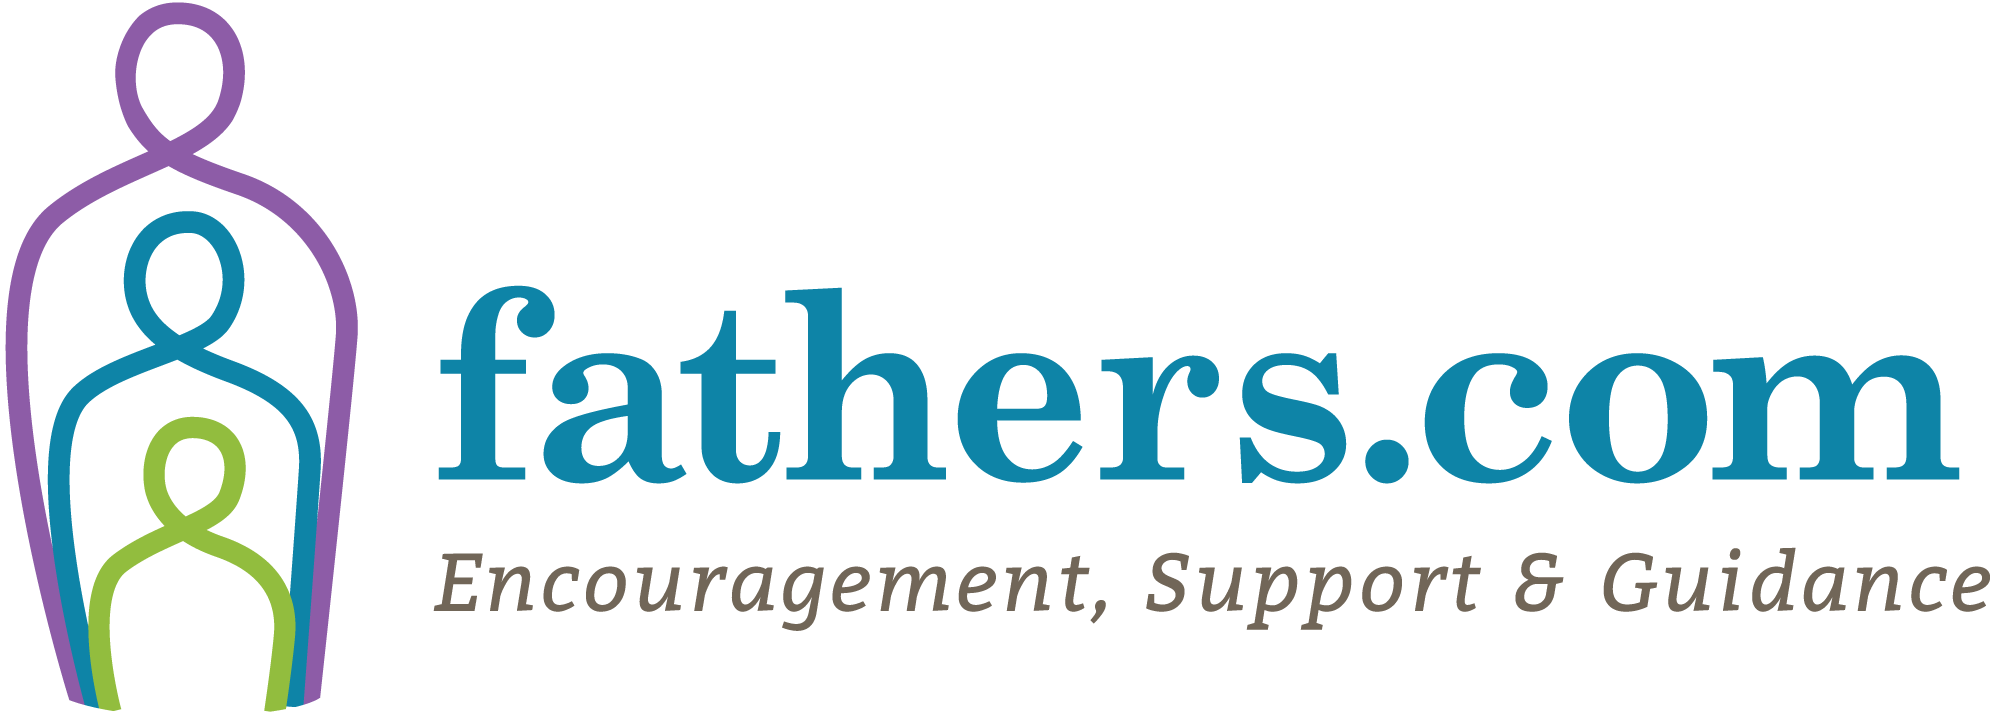 The National Center of Fathering